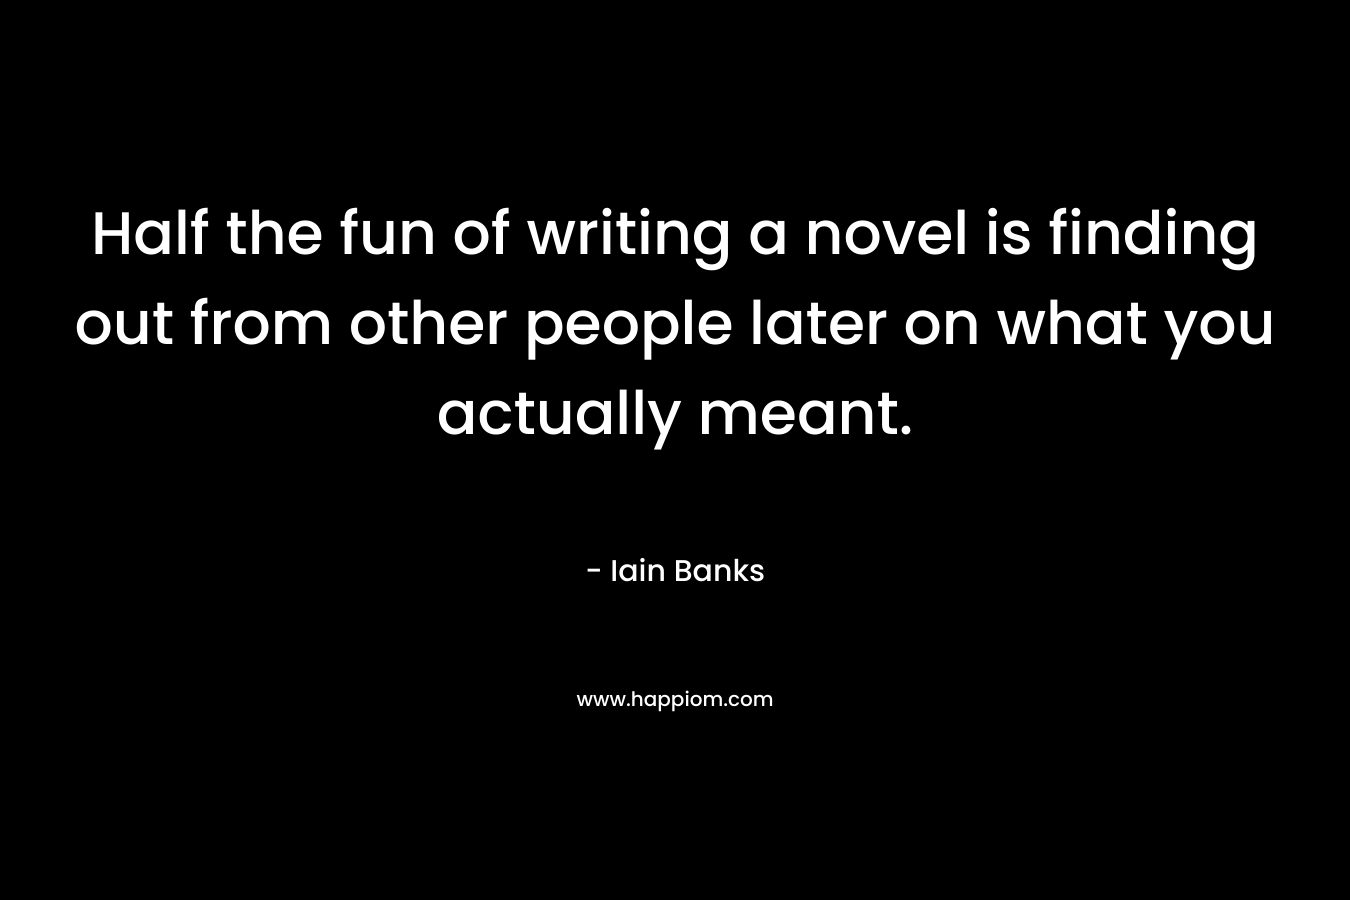 Half the fun of writing a novel is finding out from other people later on what you actually meant. – Iain Banks